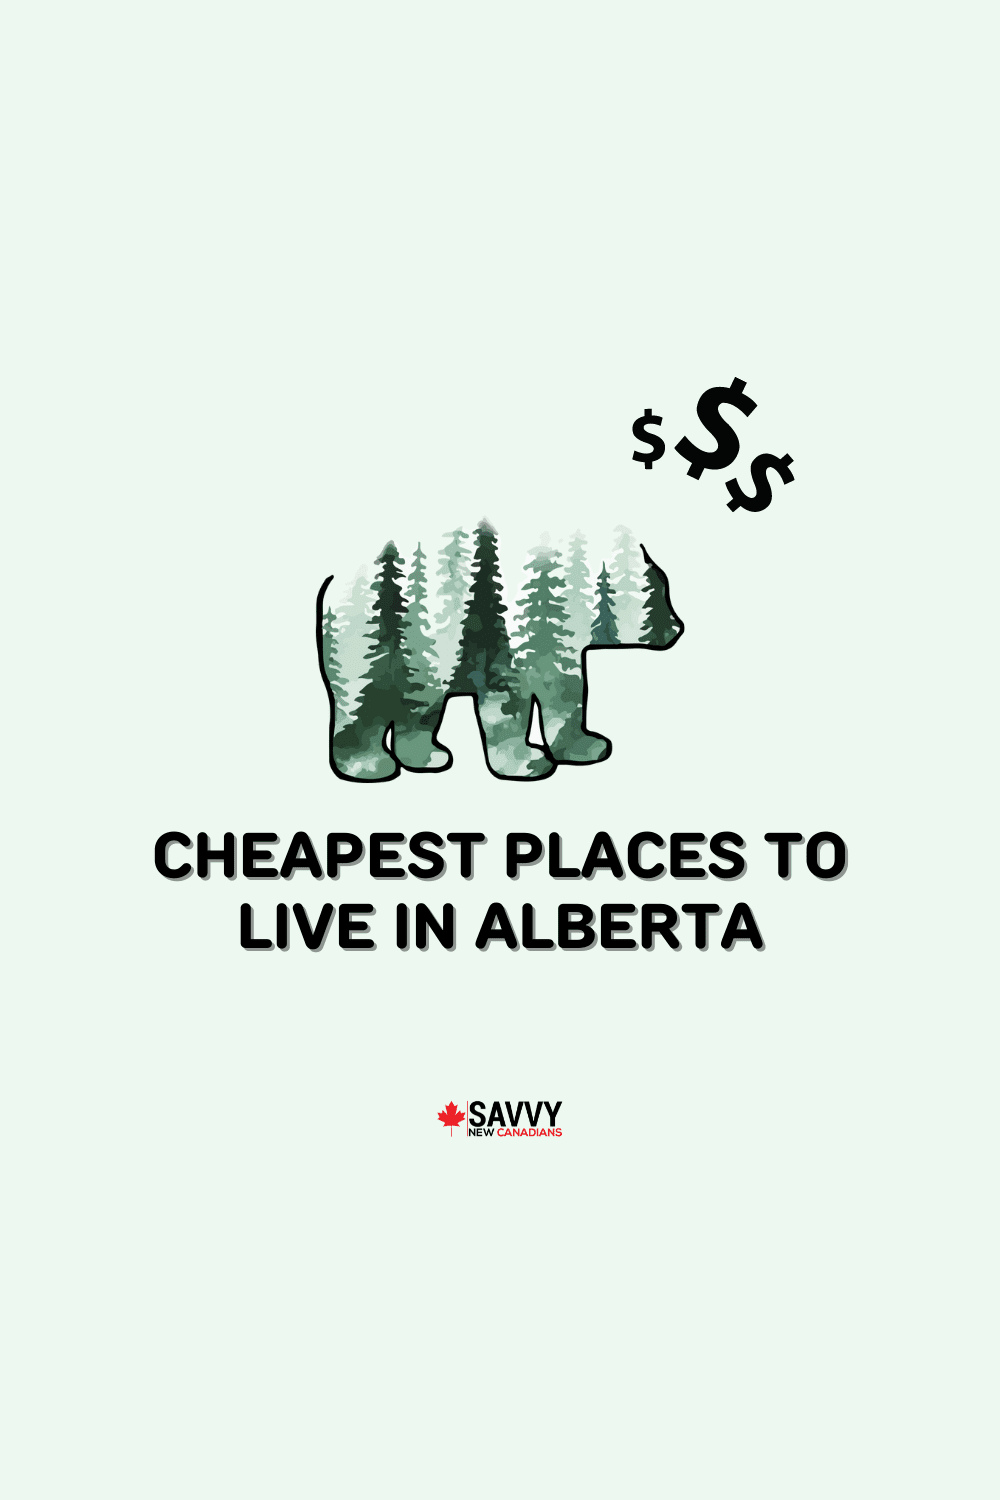 10 Cheapest Places to Live in Alberta in 2022